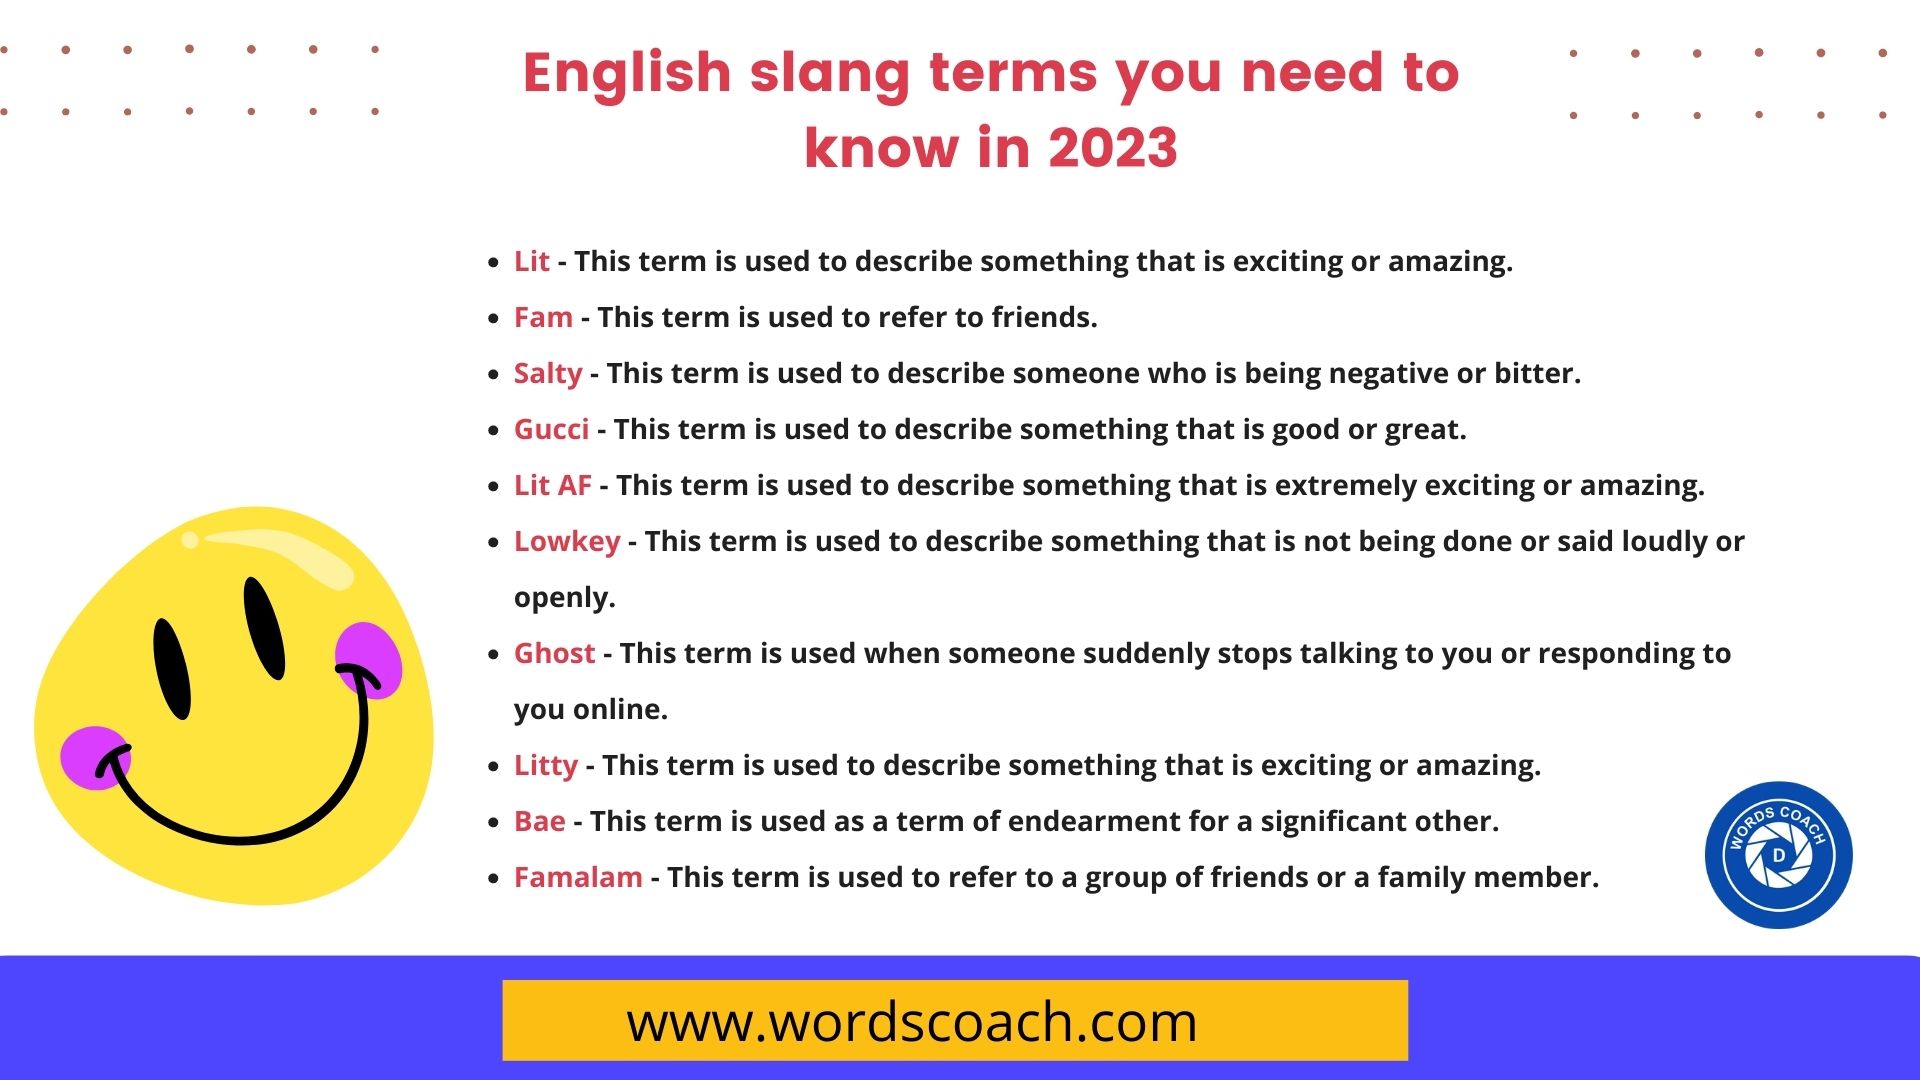 10 English slang terms you need to know in 2023 Word Coach